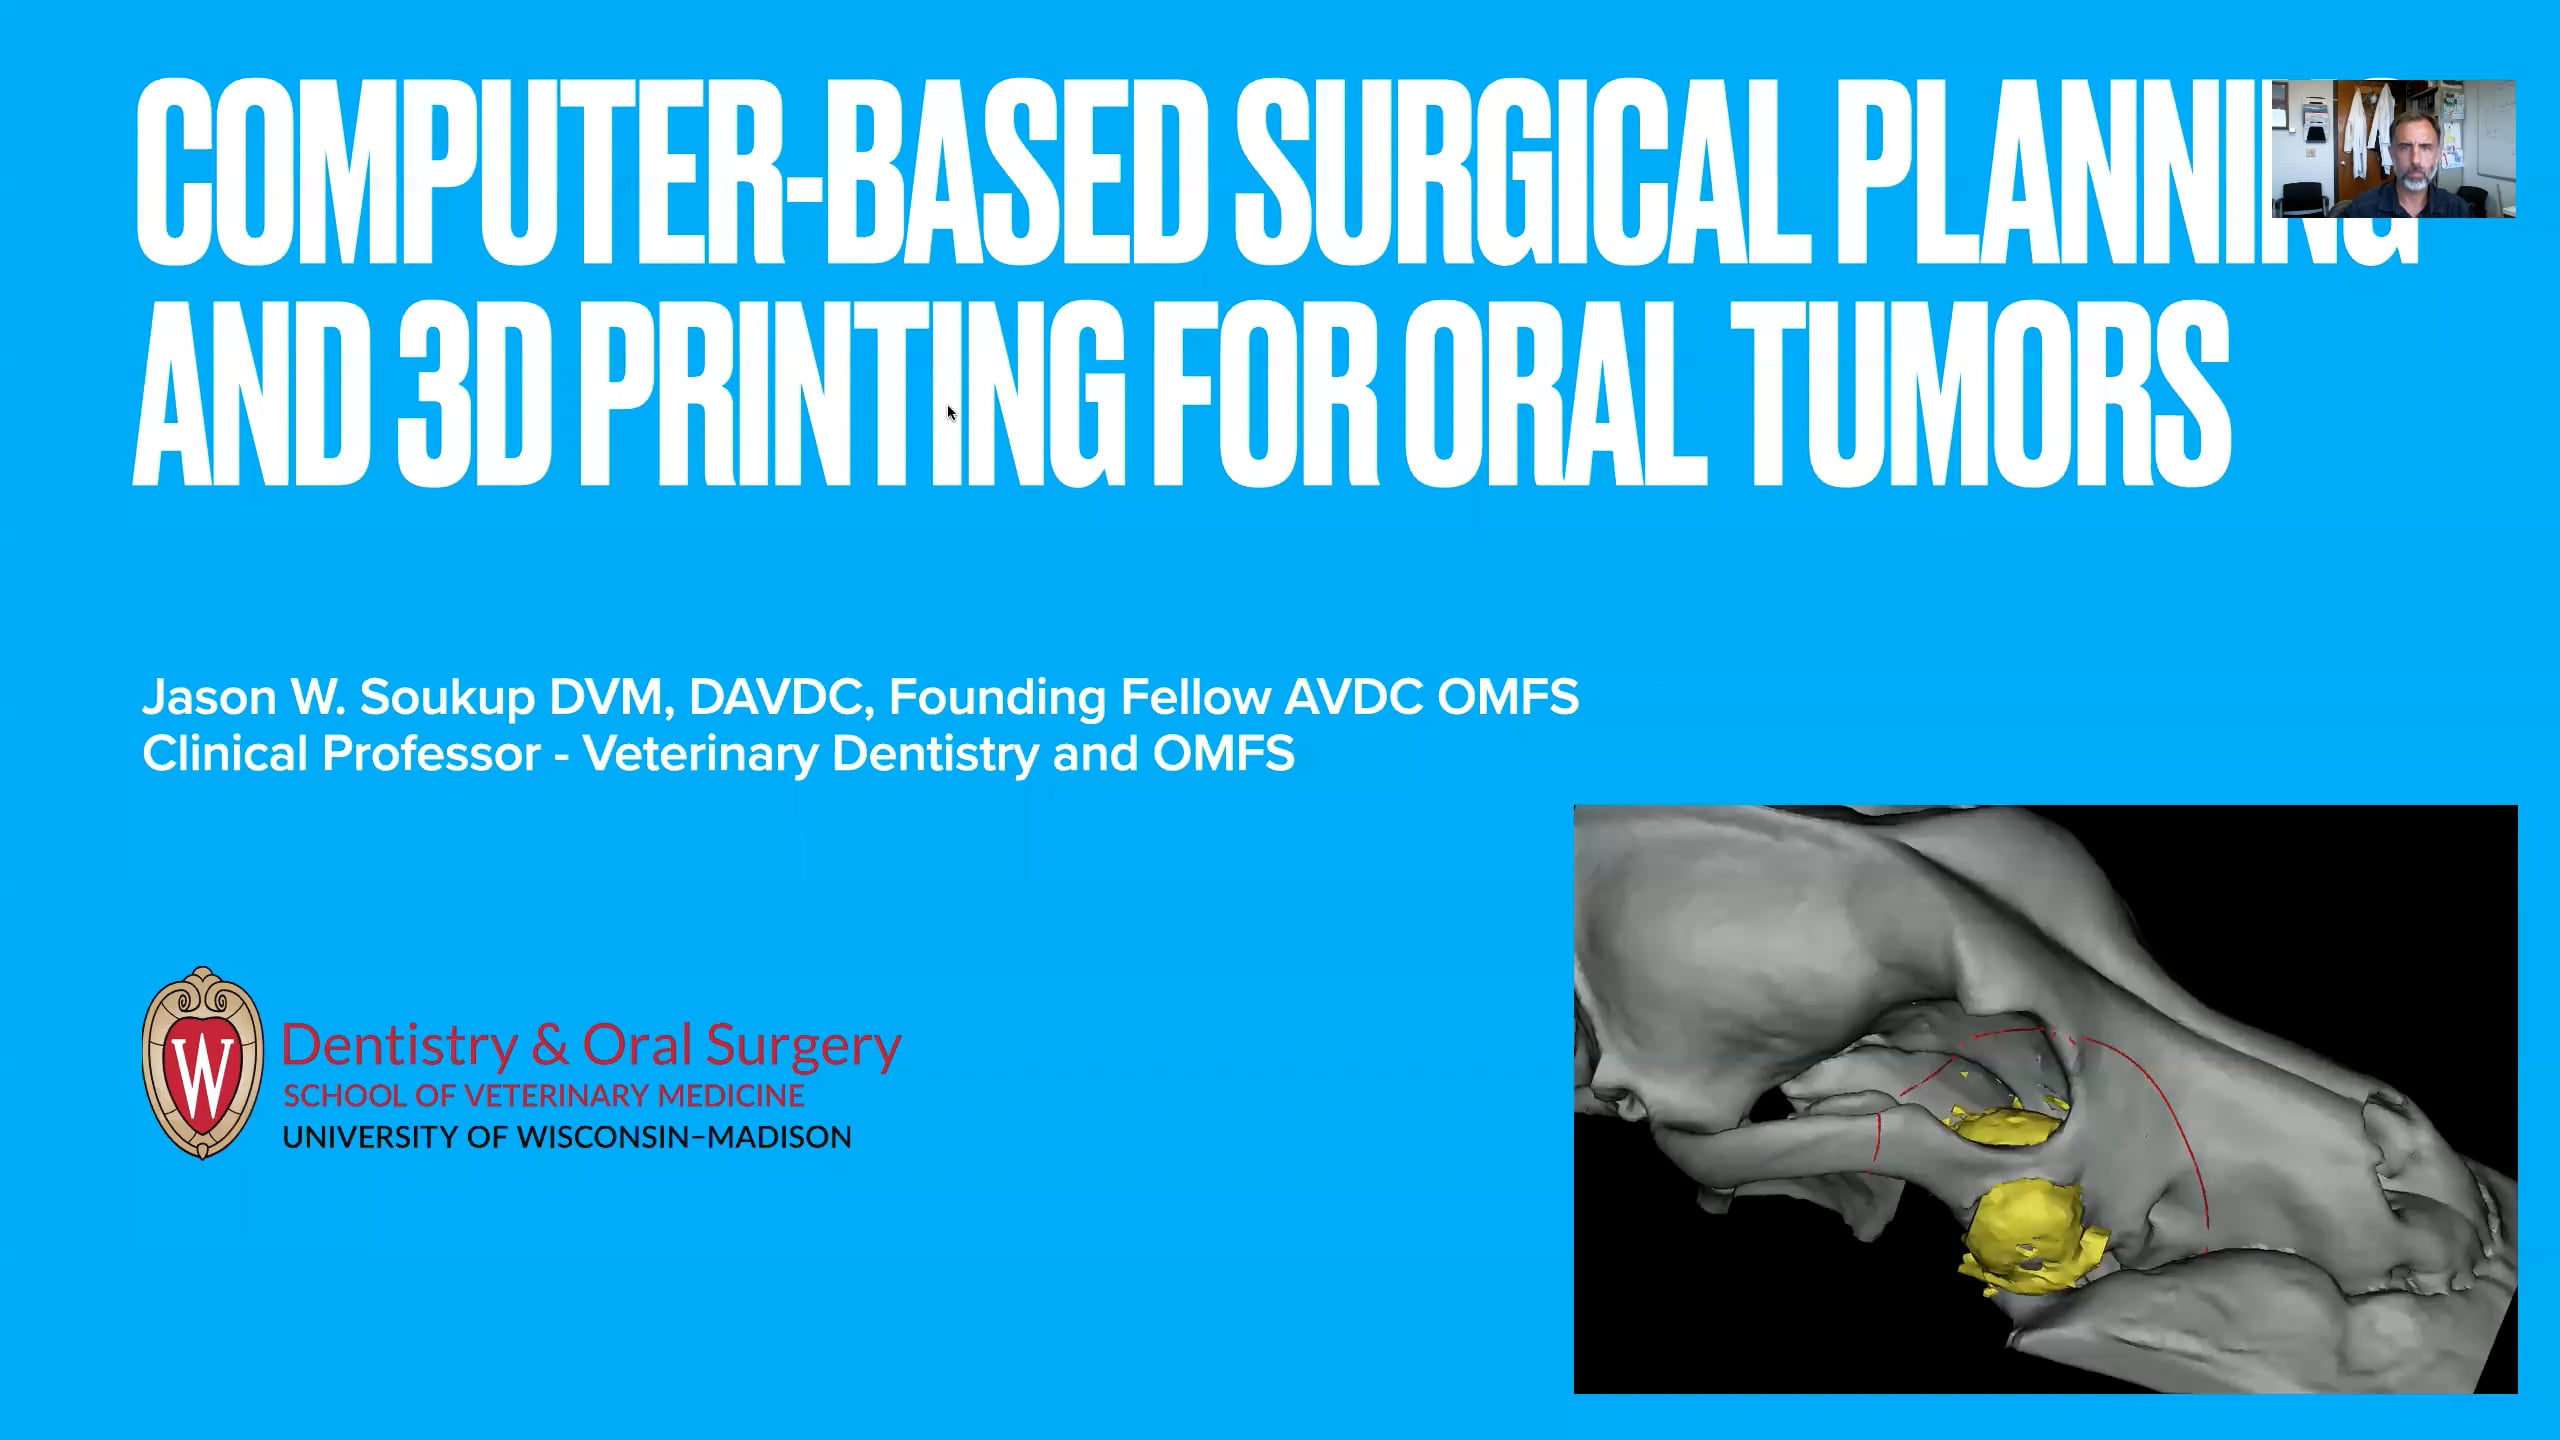 Computer-based surgical planning and 3D printing for oral tumors